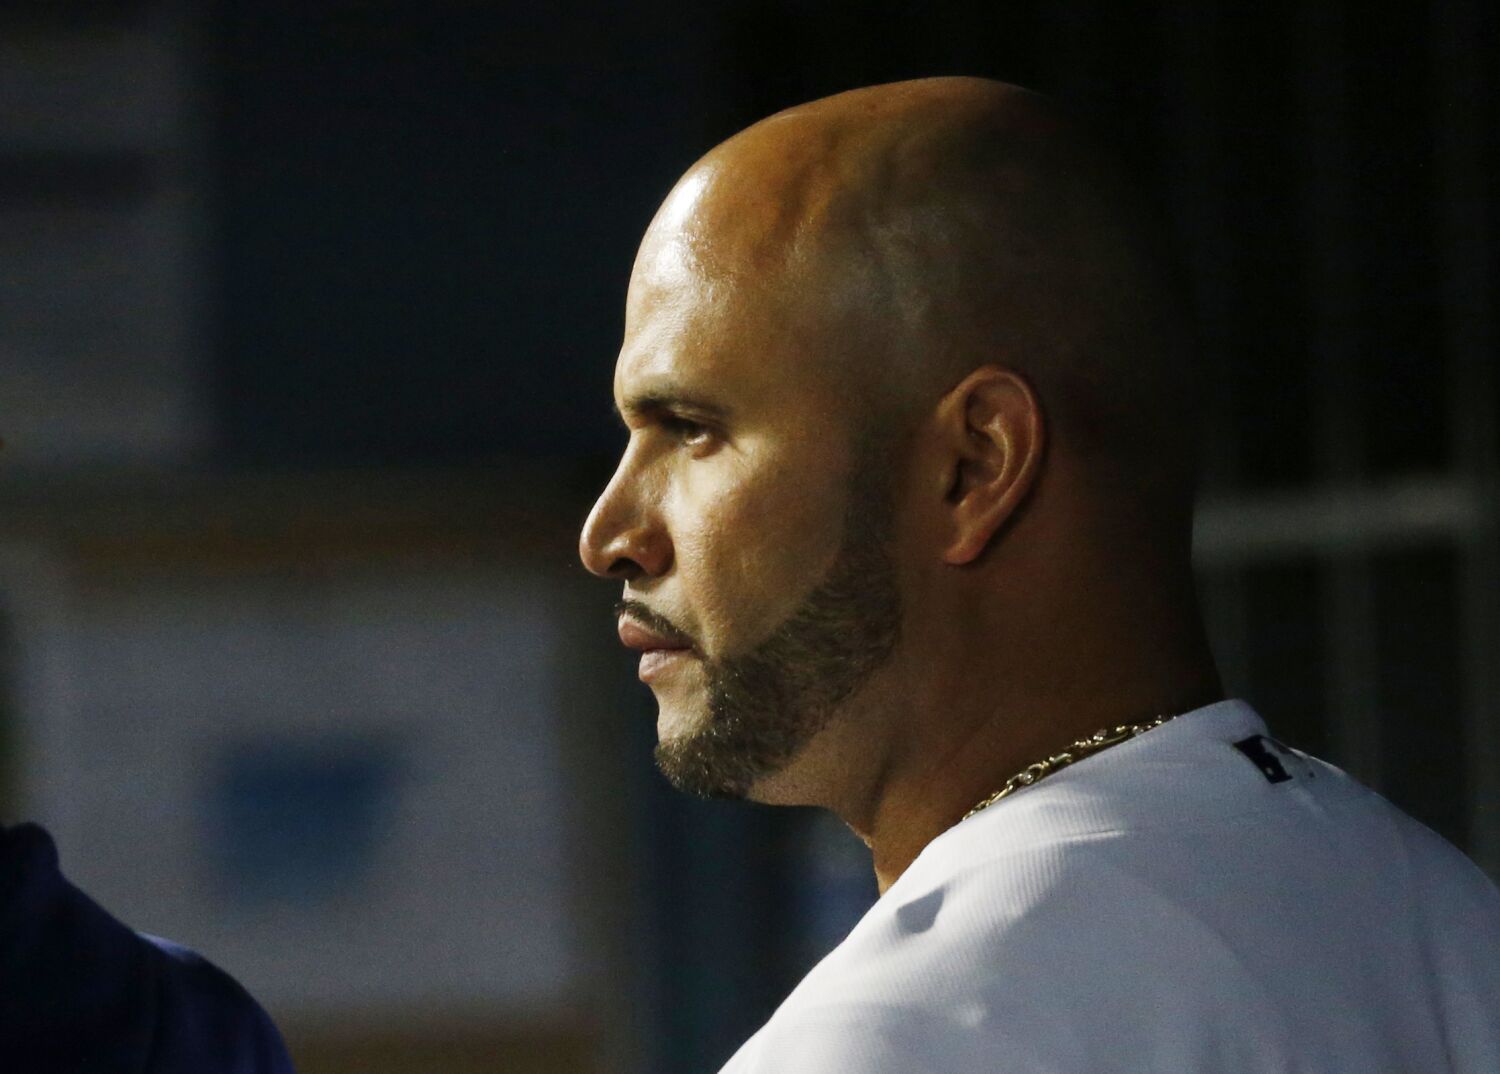 Albert Pujols remains as Angels special assistant despite new MLB roles, team says